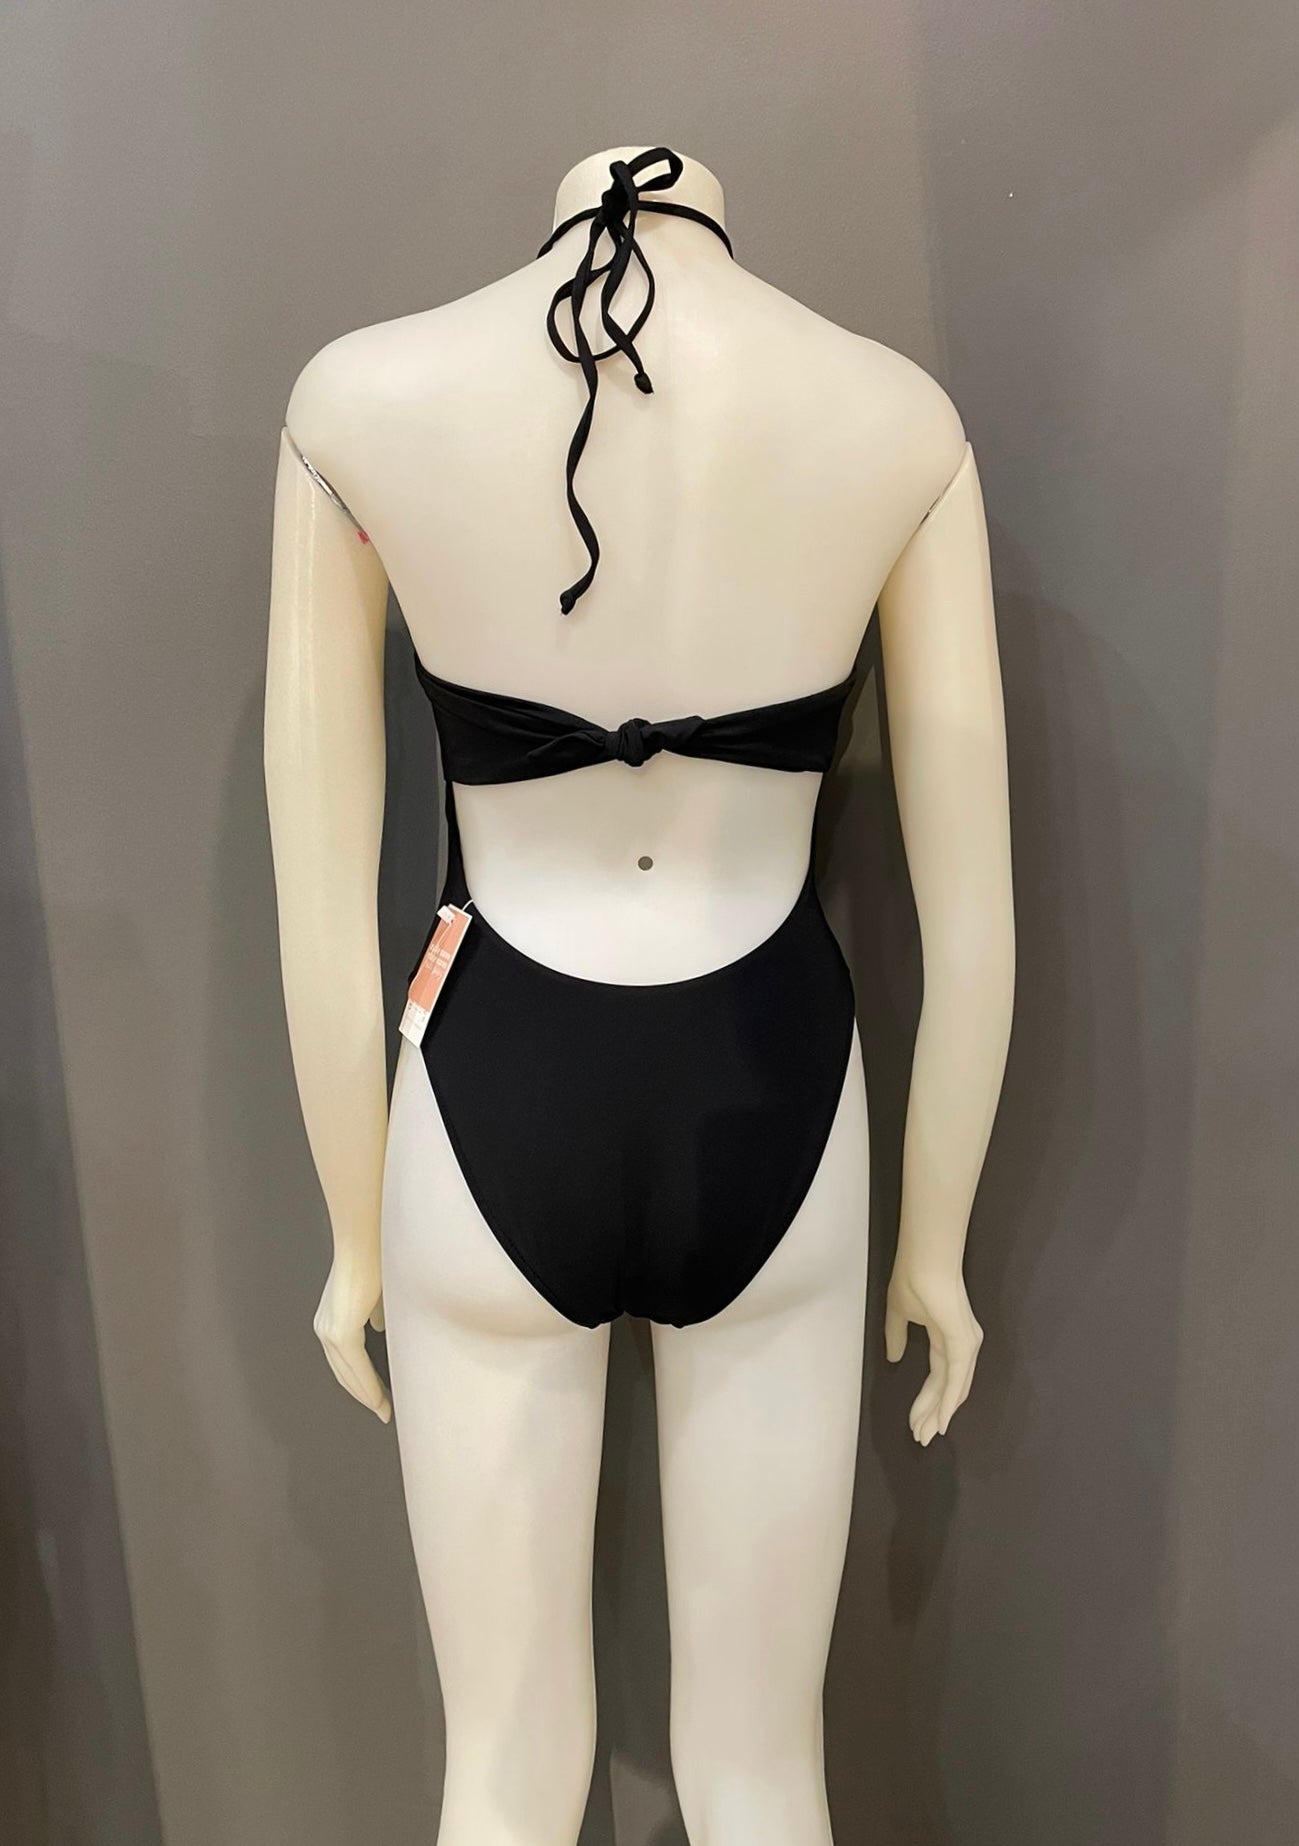 UNIKONCEPT Lifestyle Boutique and Lounge; Dippin Daisys Wave Rider One Piece swimsuit. Pictured on a mannequin